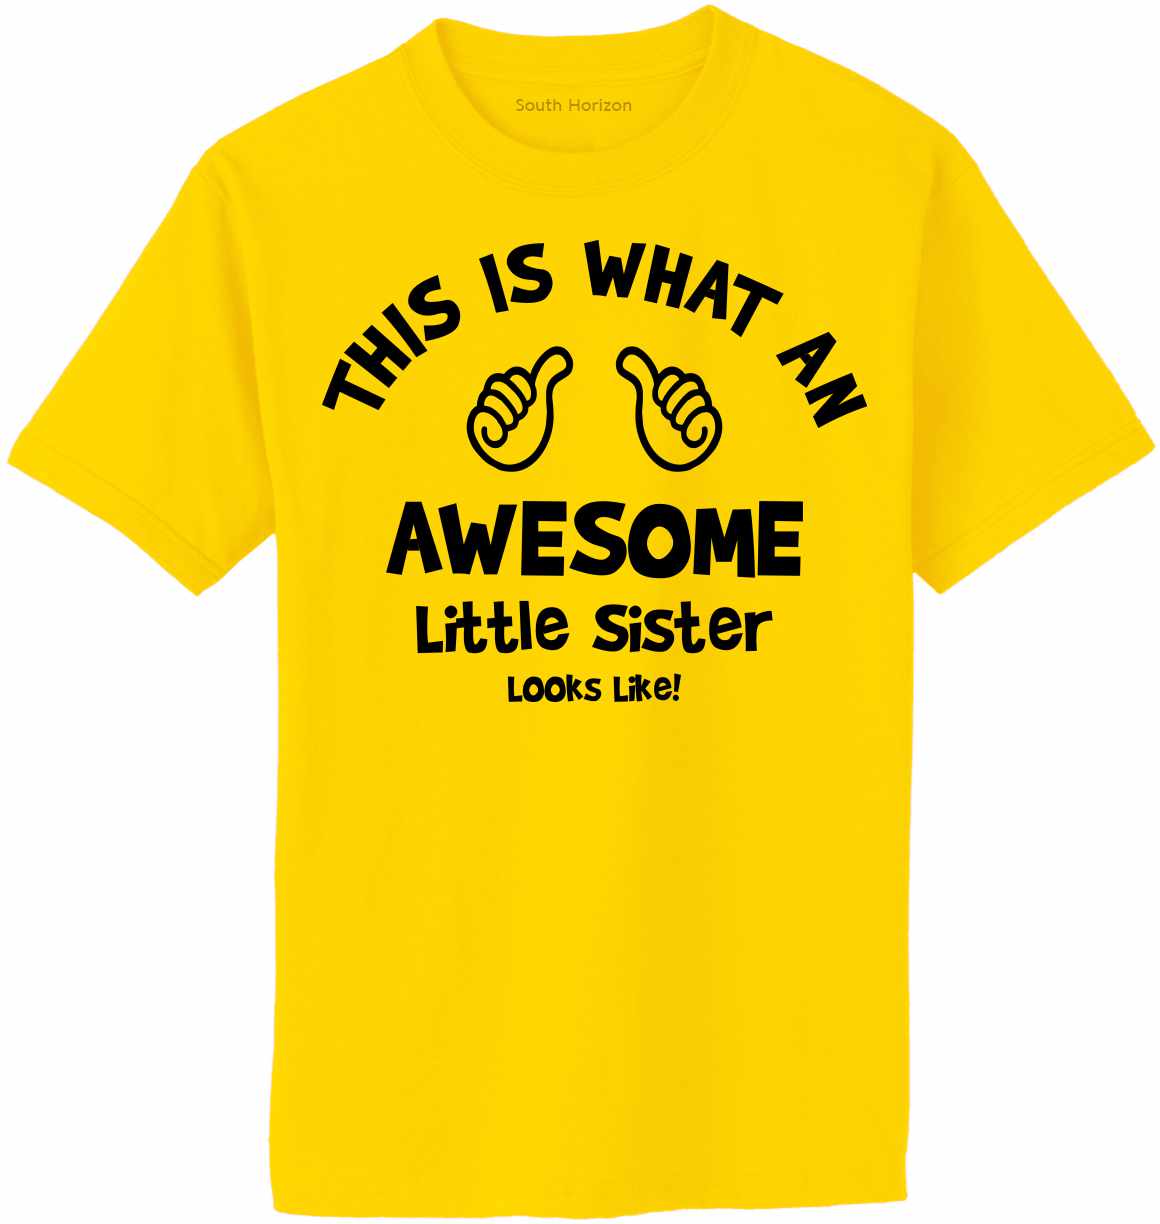 This is What an AWESOME LITTLE SISTER Looks Like Adult T-Shirt (#1037-1)